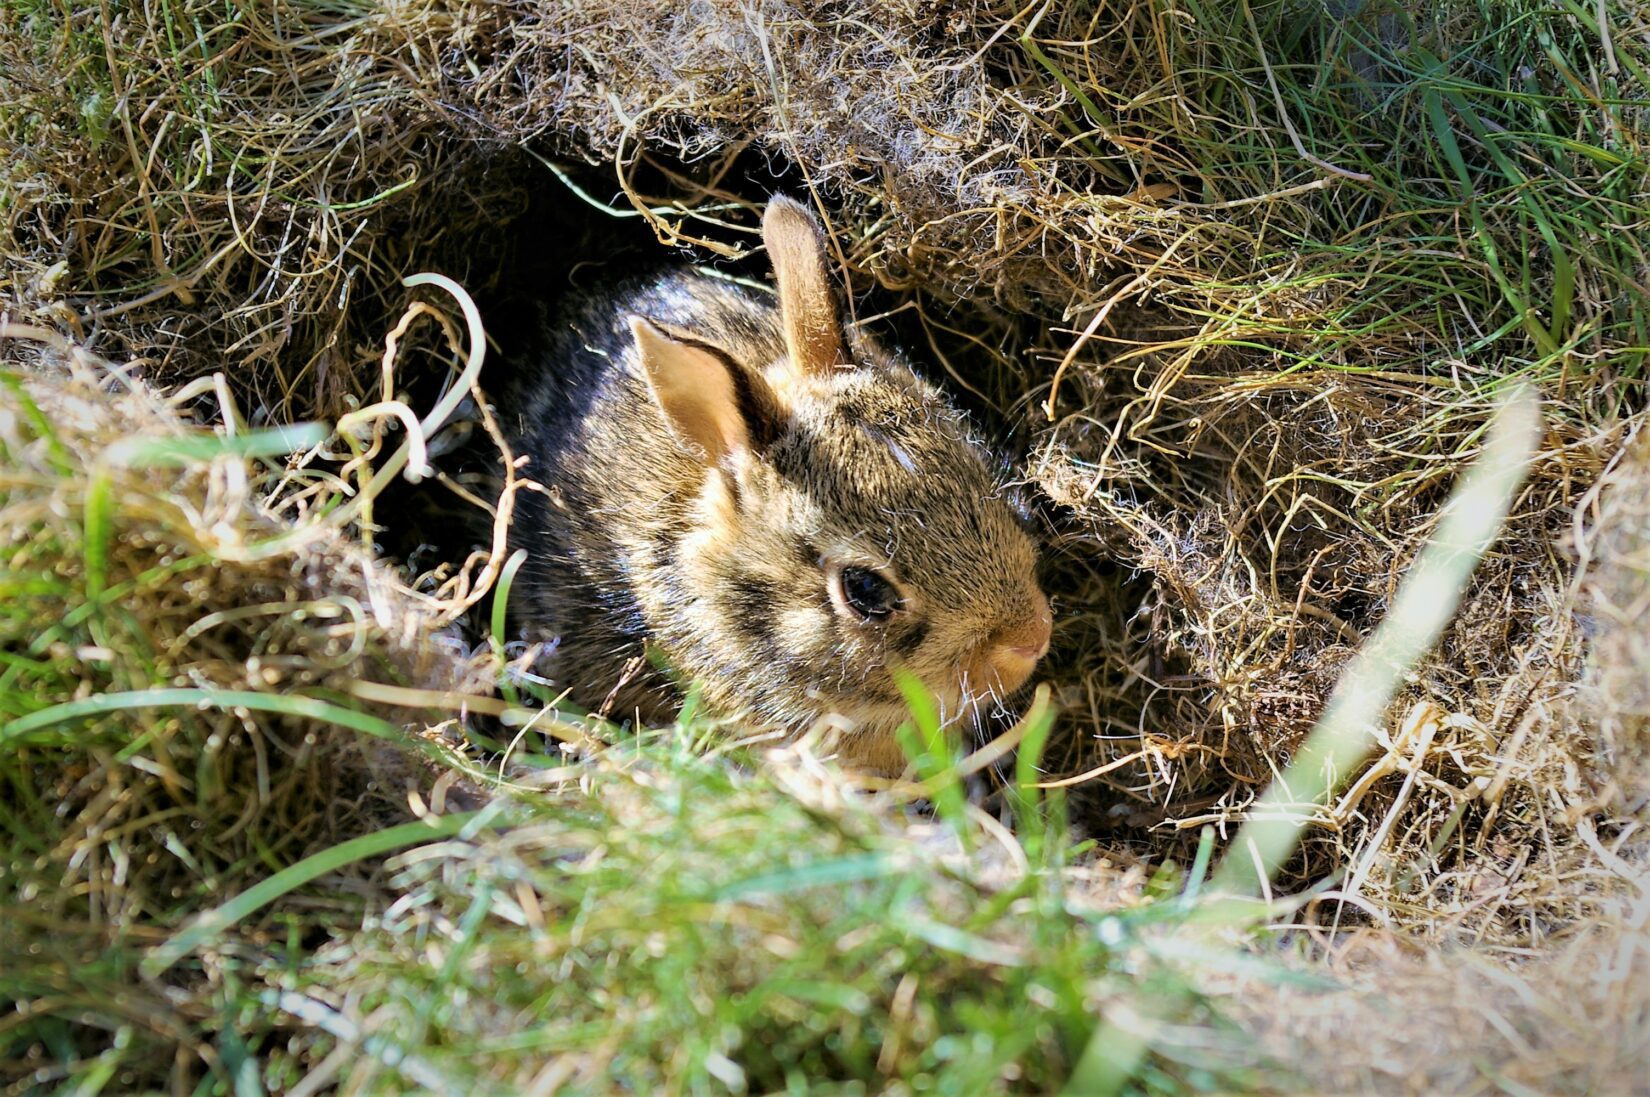 Baby cottontail rabbit peeking out of shallow nest hole